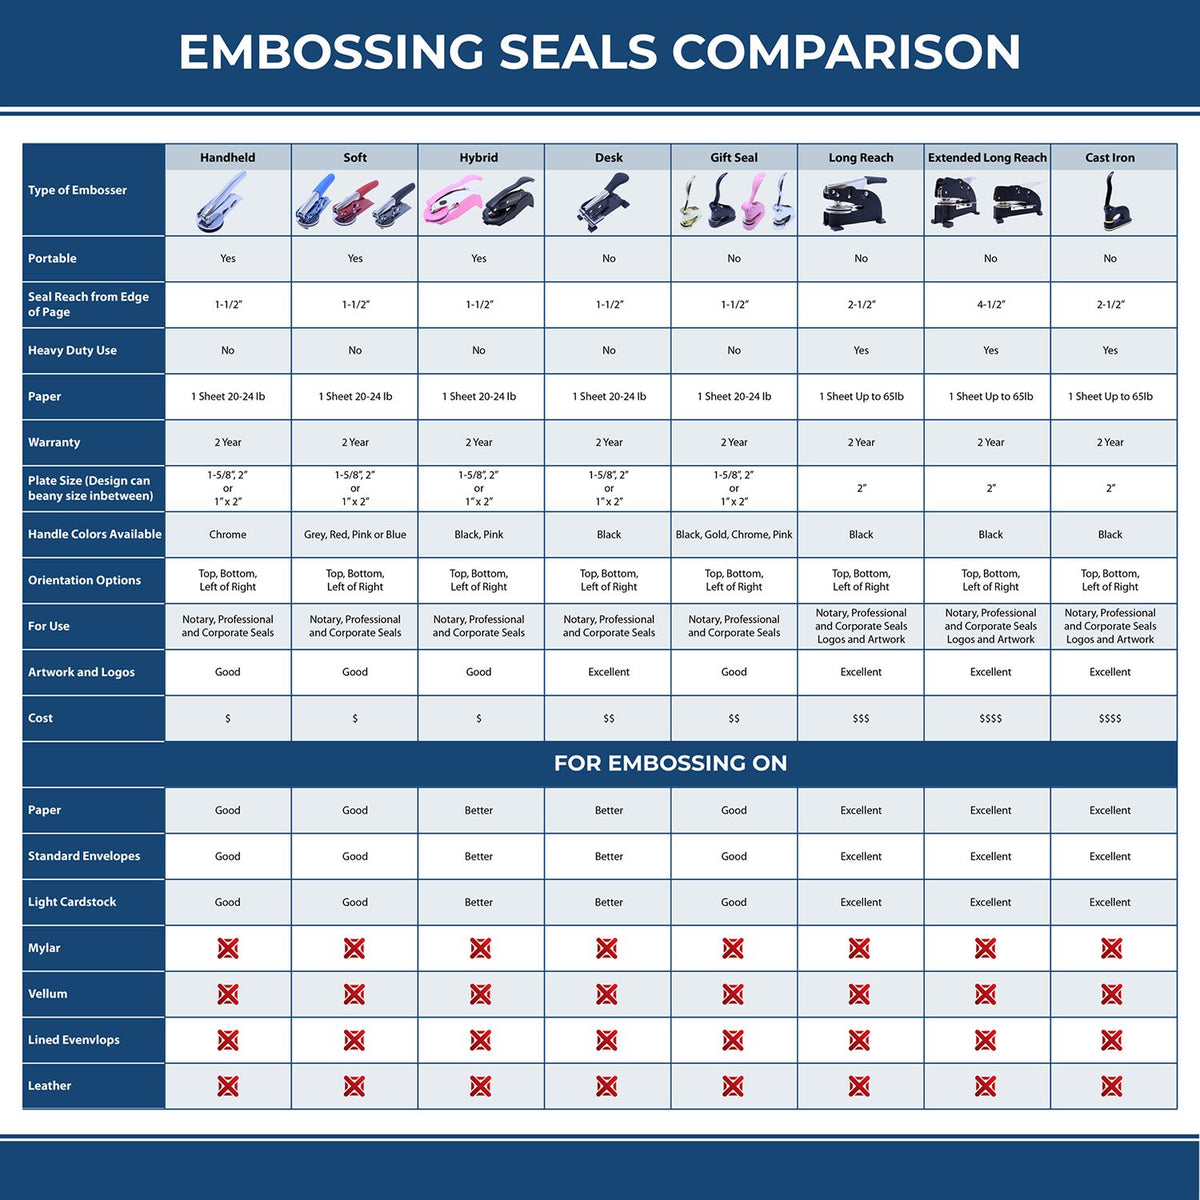 A comparison chart for the different types of mount models available for the Long Reach Delaware Land Surveyor Seal.